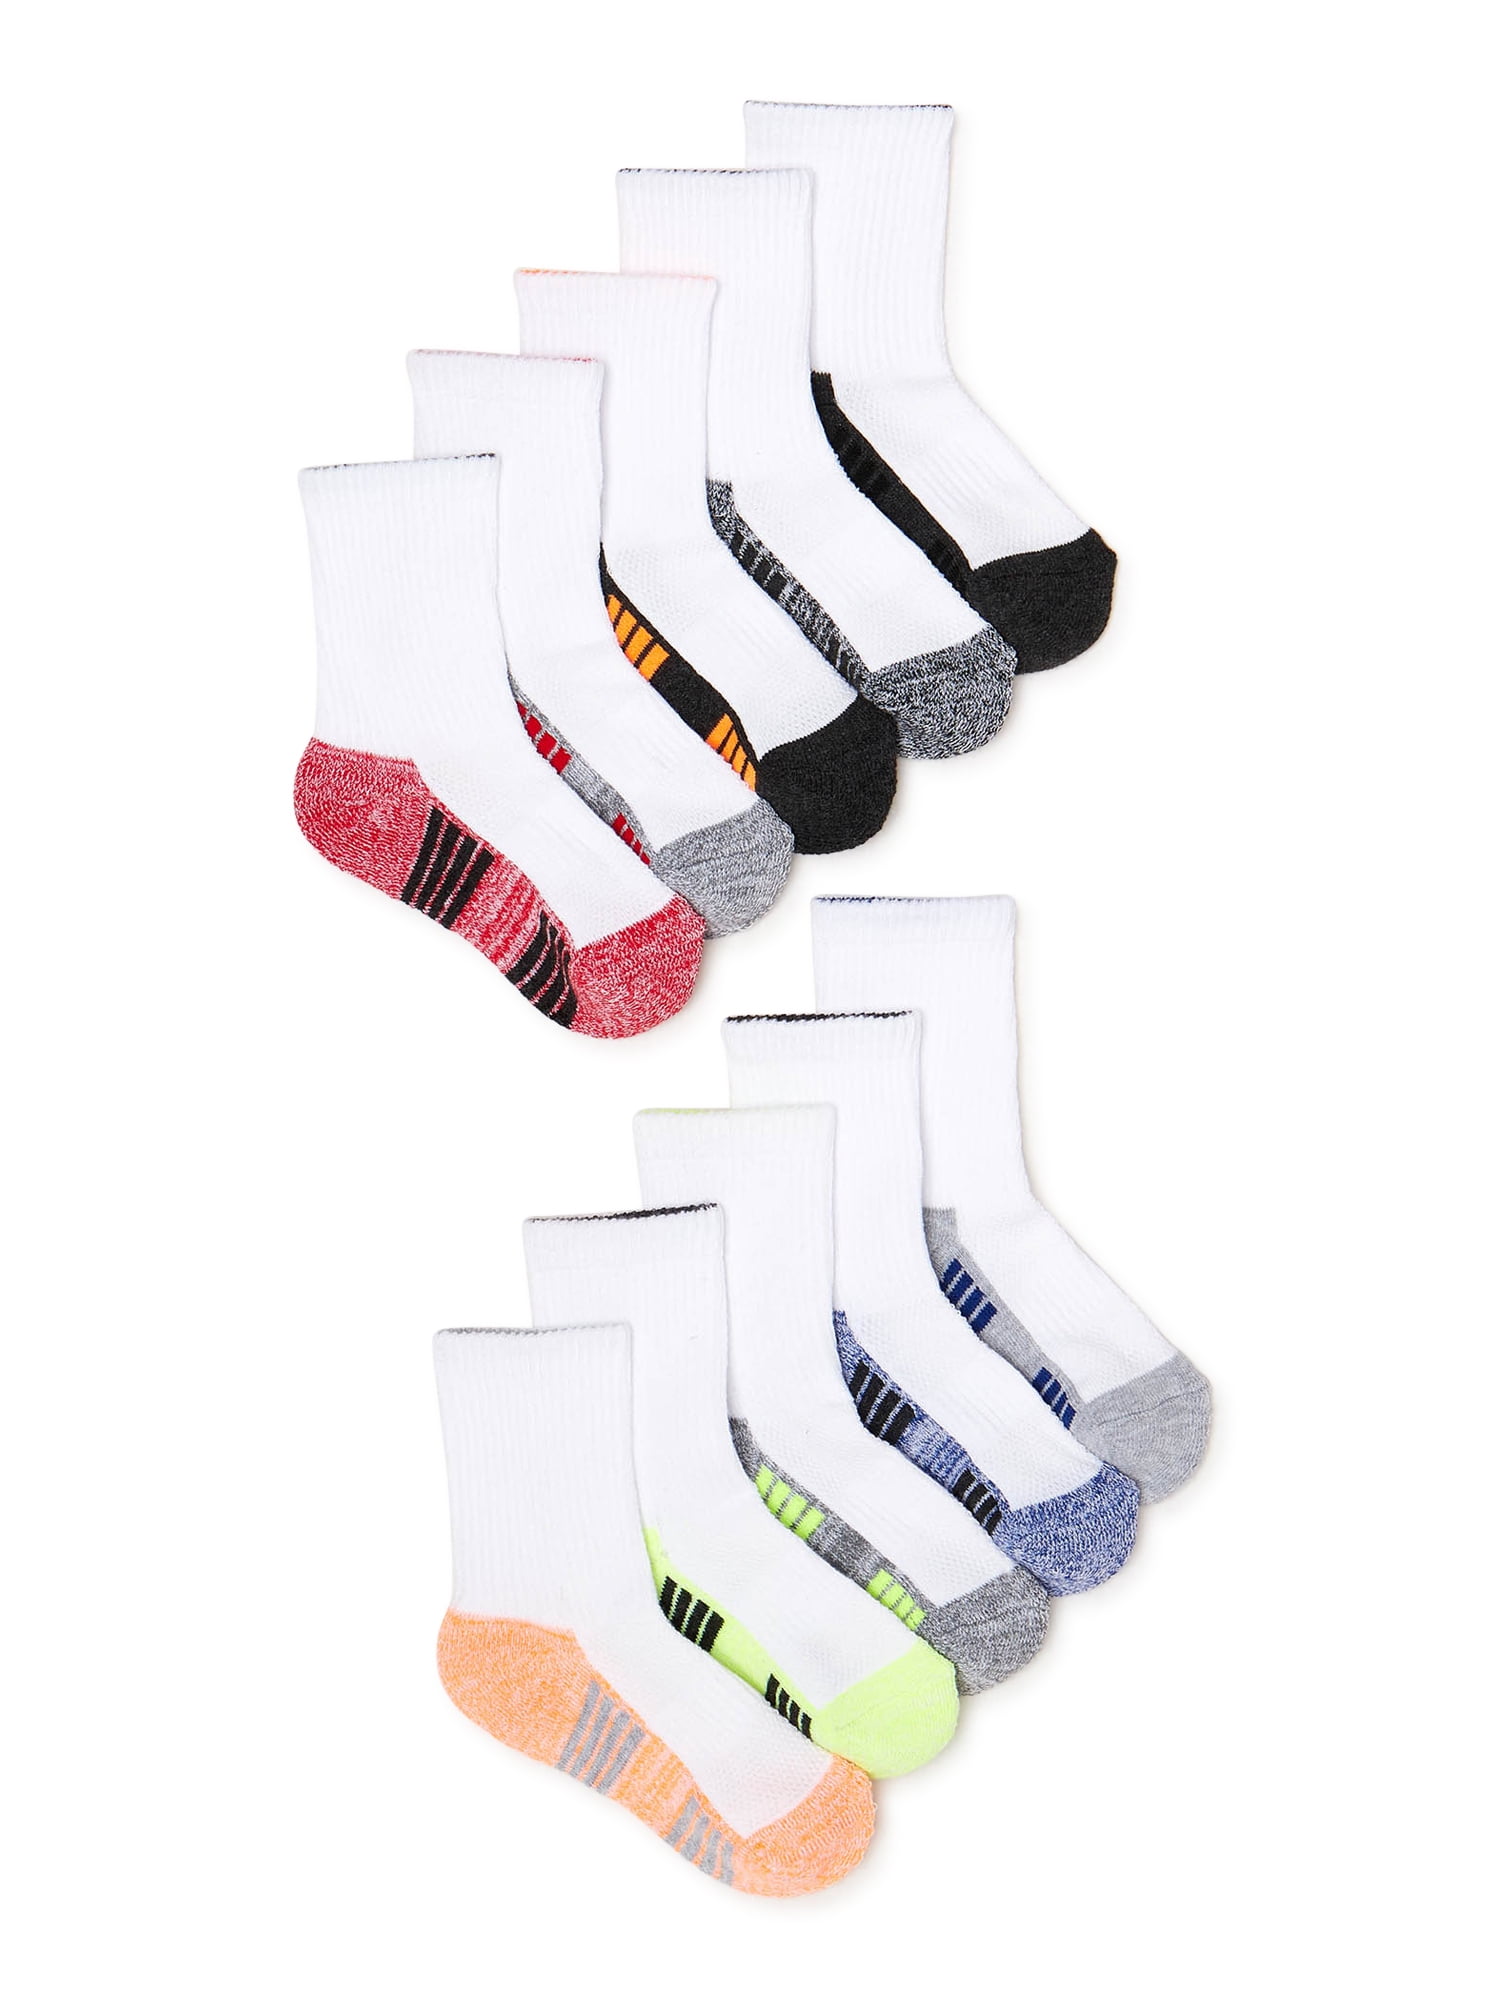 Crew socks: When did our gym socks become a barometer of our age